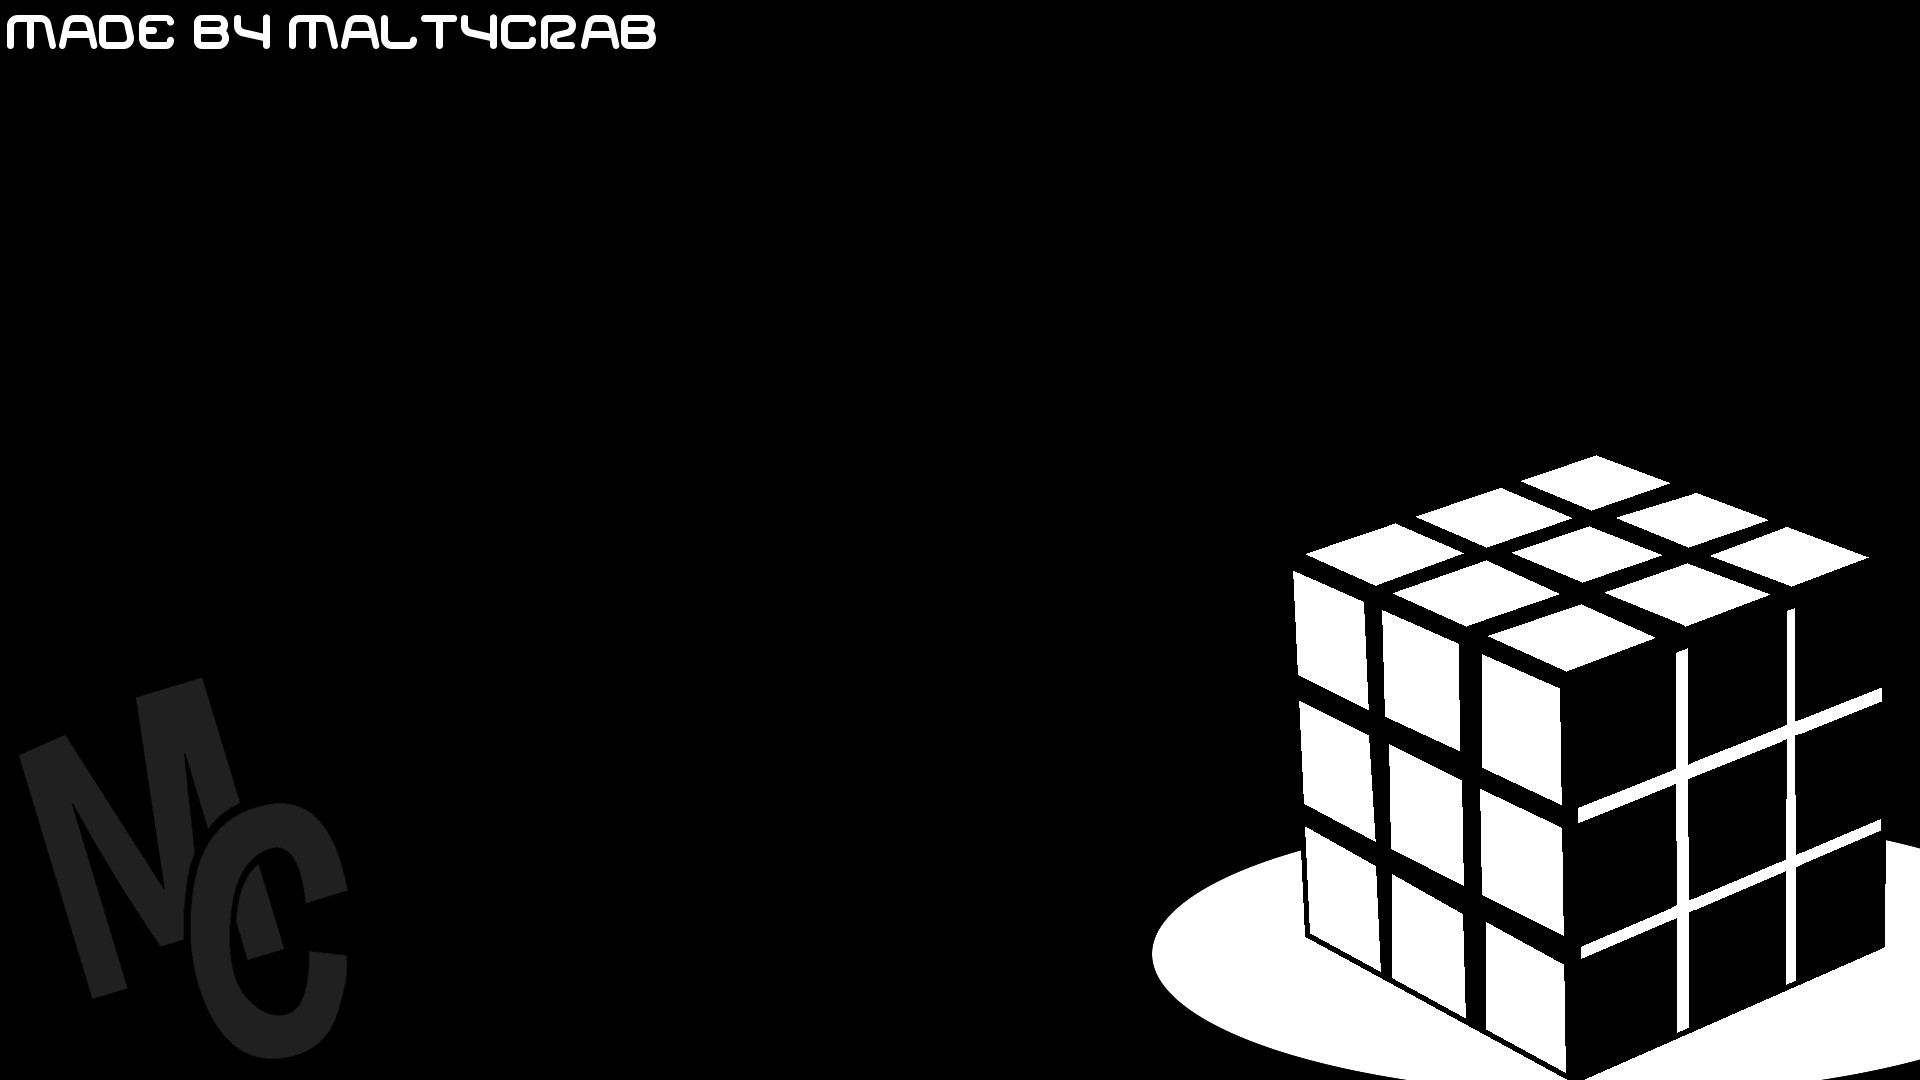 1920x1080 ... Rubik's Cube Background (Black and White) by MaltyCrab